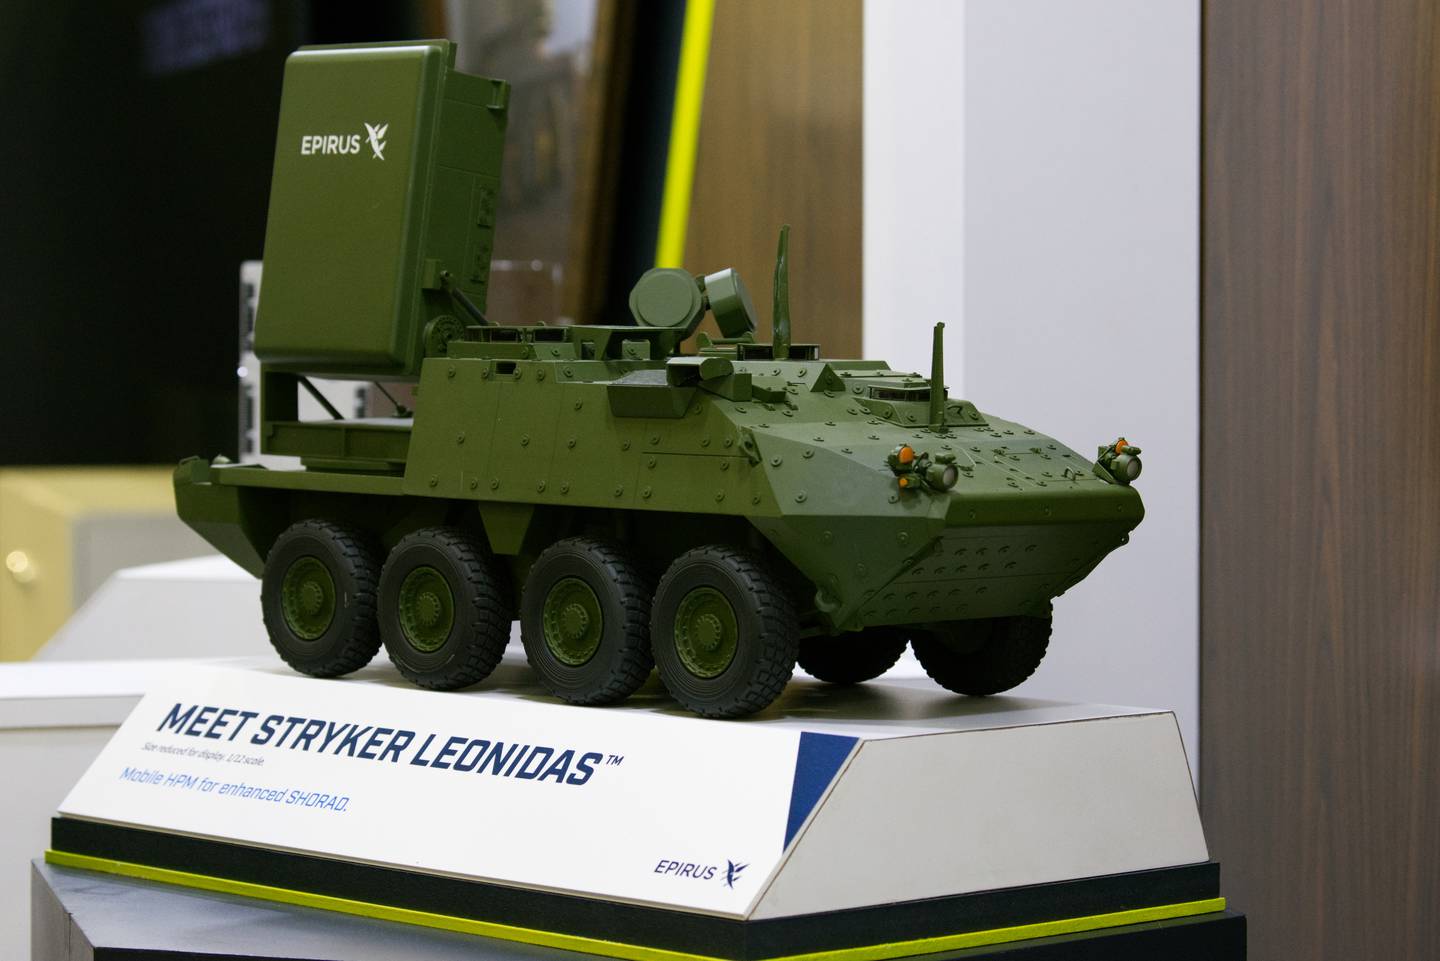 A model of a Stryker Leonidas directed-energy system is displayed at the Epirus booth at the Air, Space and Cyber Conference in National Harbor, Maryland.